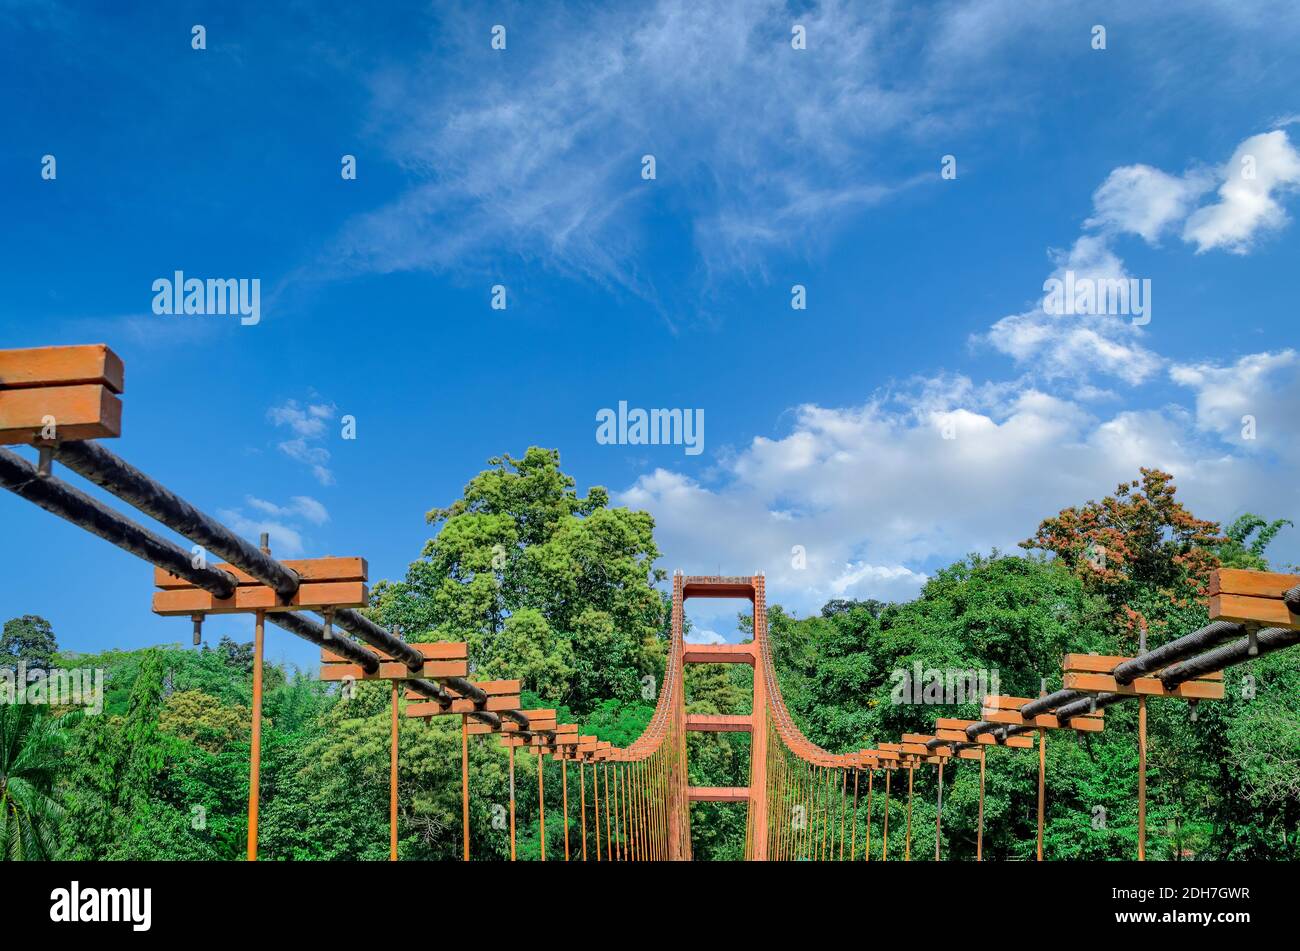 Top of an old, rusty Hanging Bridge in Ezhattumugham, Athirappilly, Kerala, India, with a clear blue sky background Stock Photo